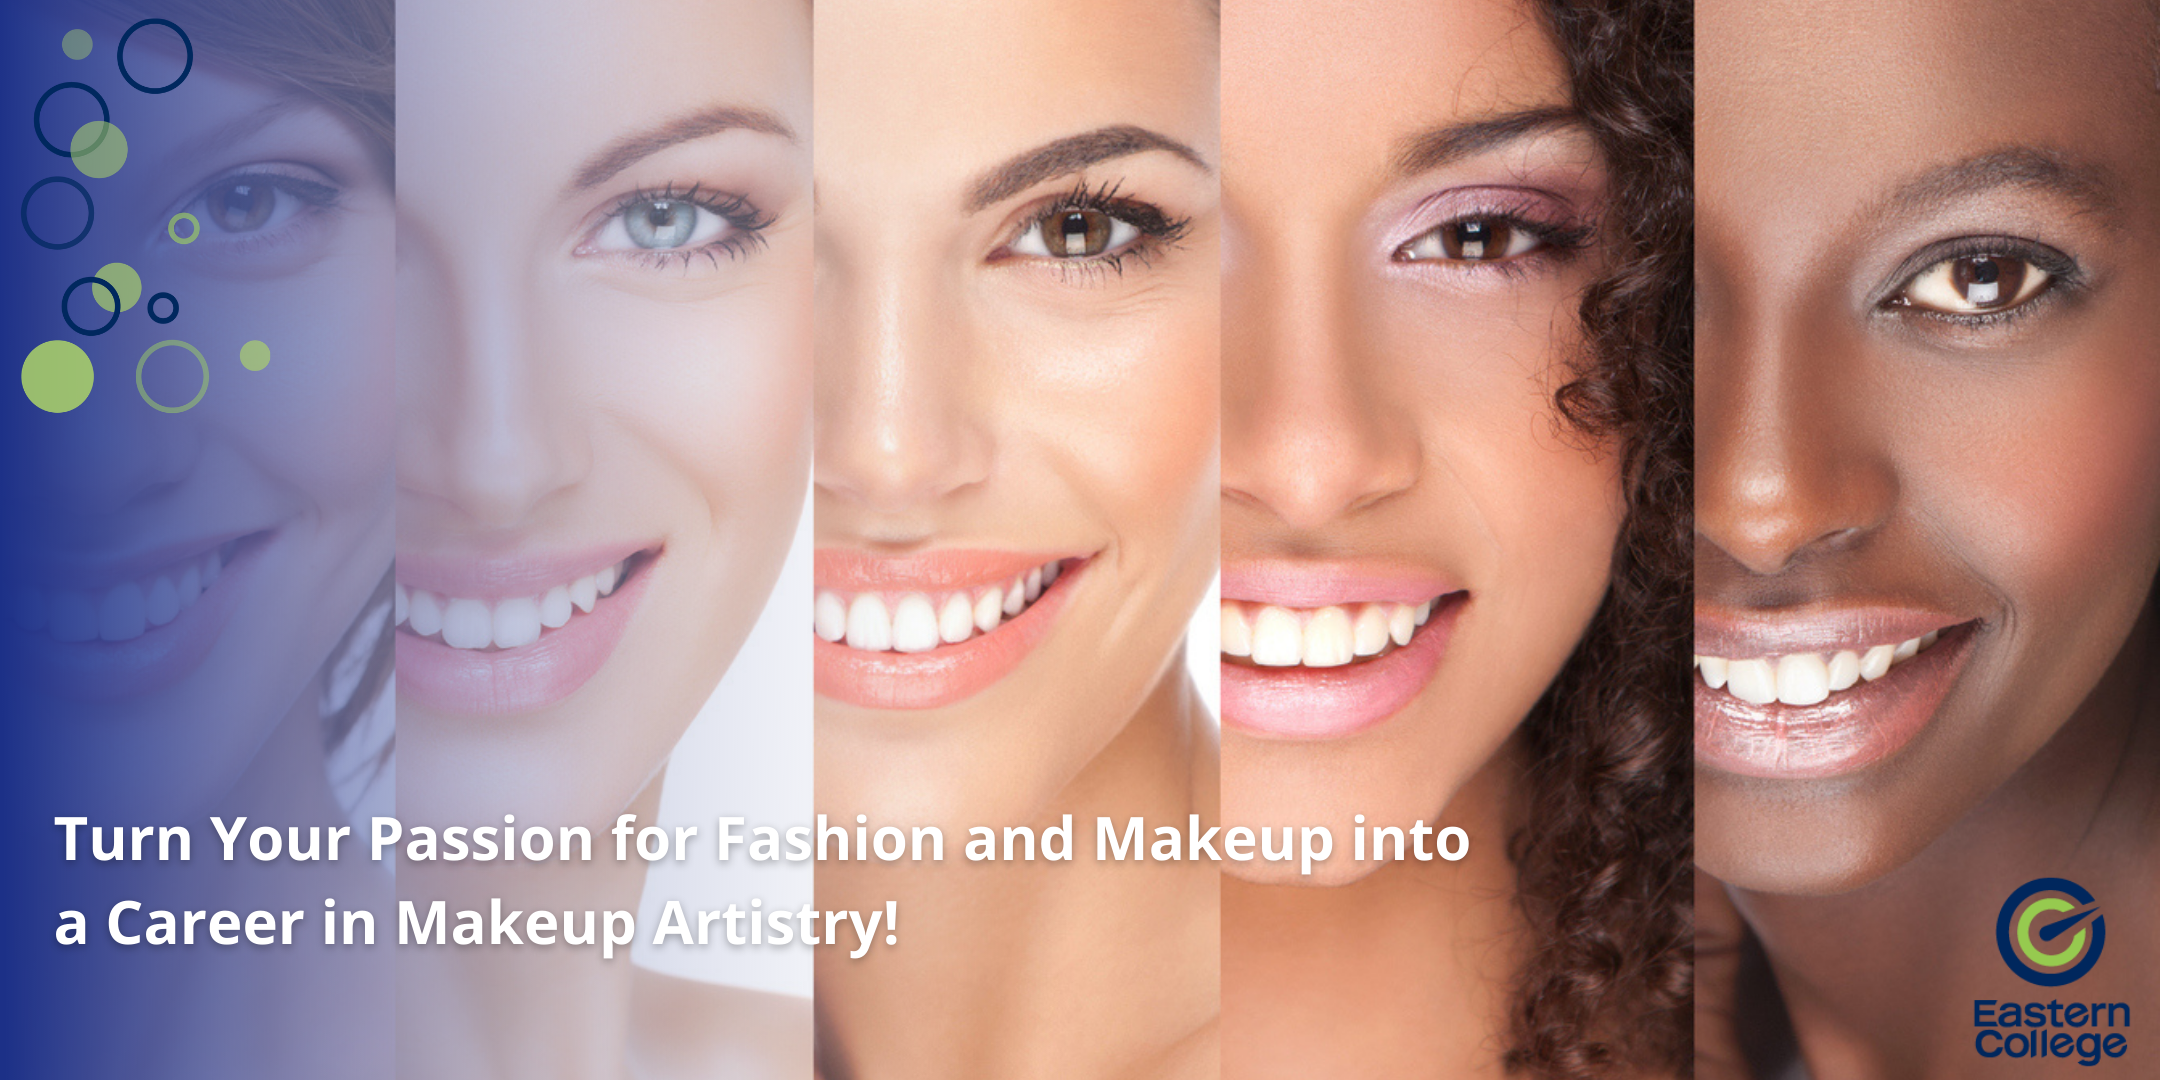 Turn your passion for fashion and makeup into a career in Makeup Artistry! featured image